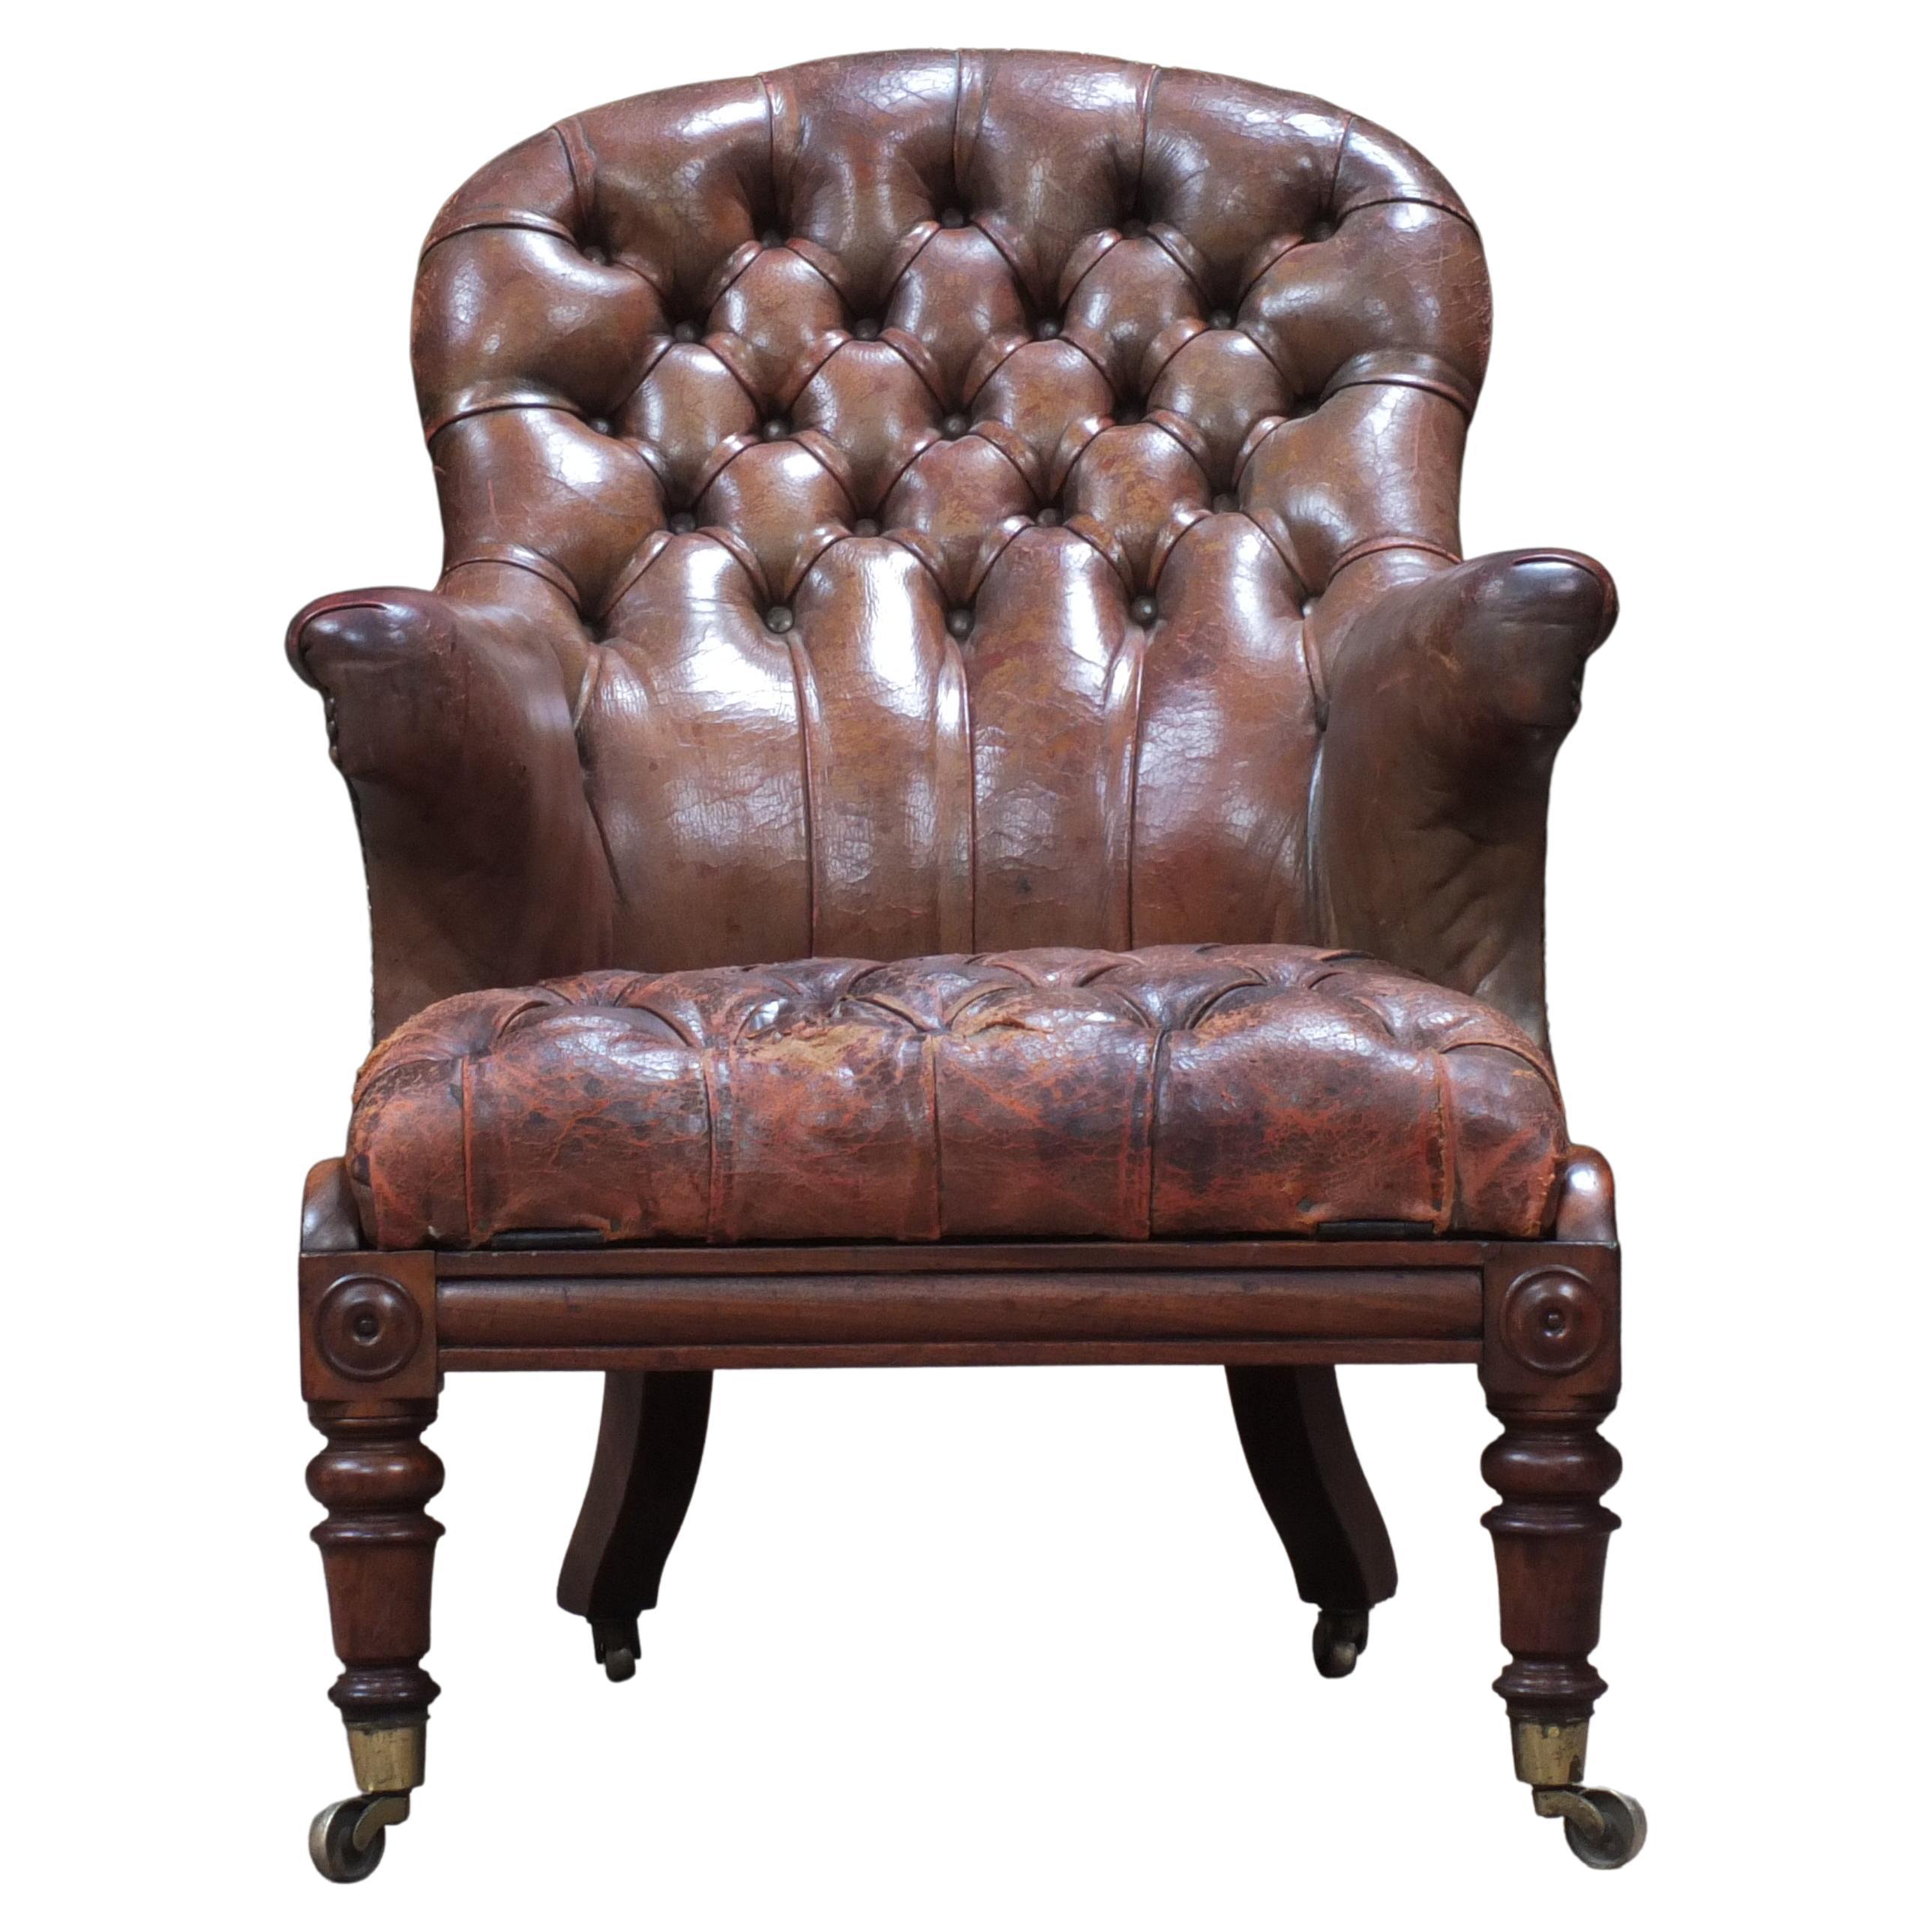 Antique English Early Victorian Walnut & Leather Buttoned Armchair, c1847